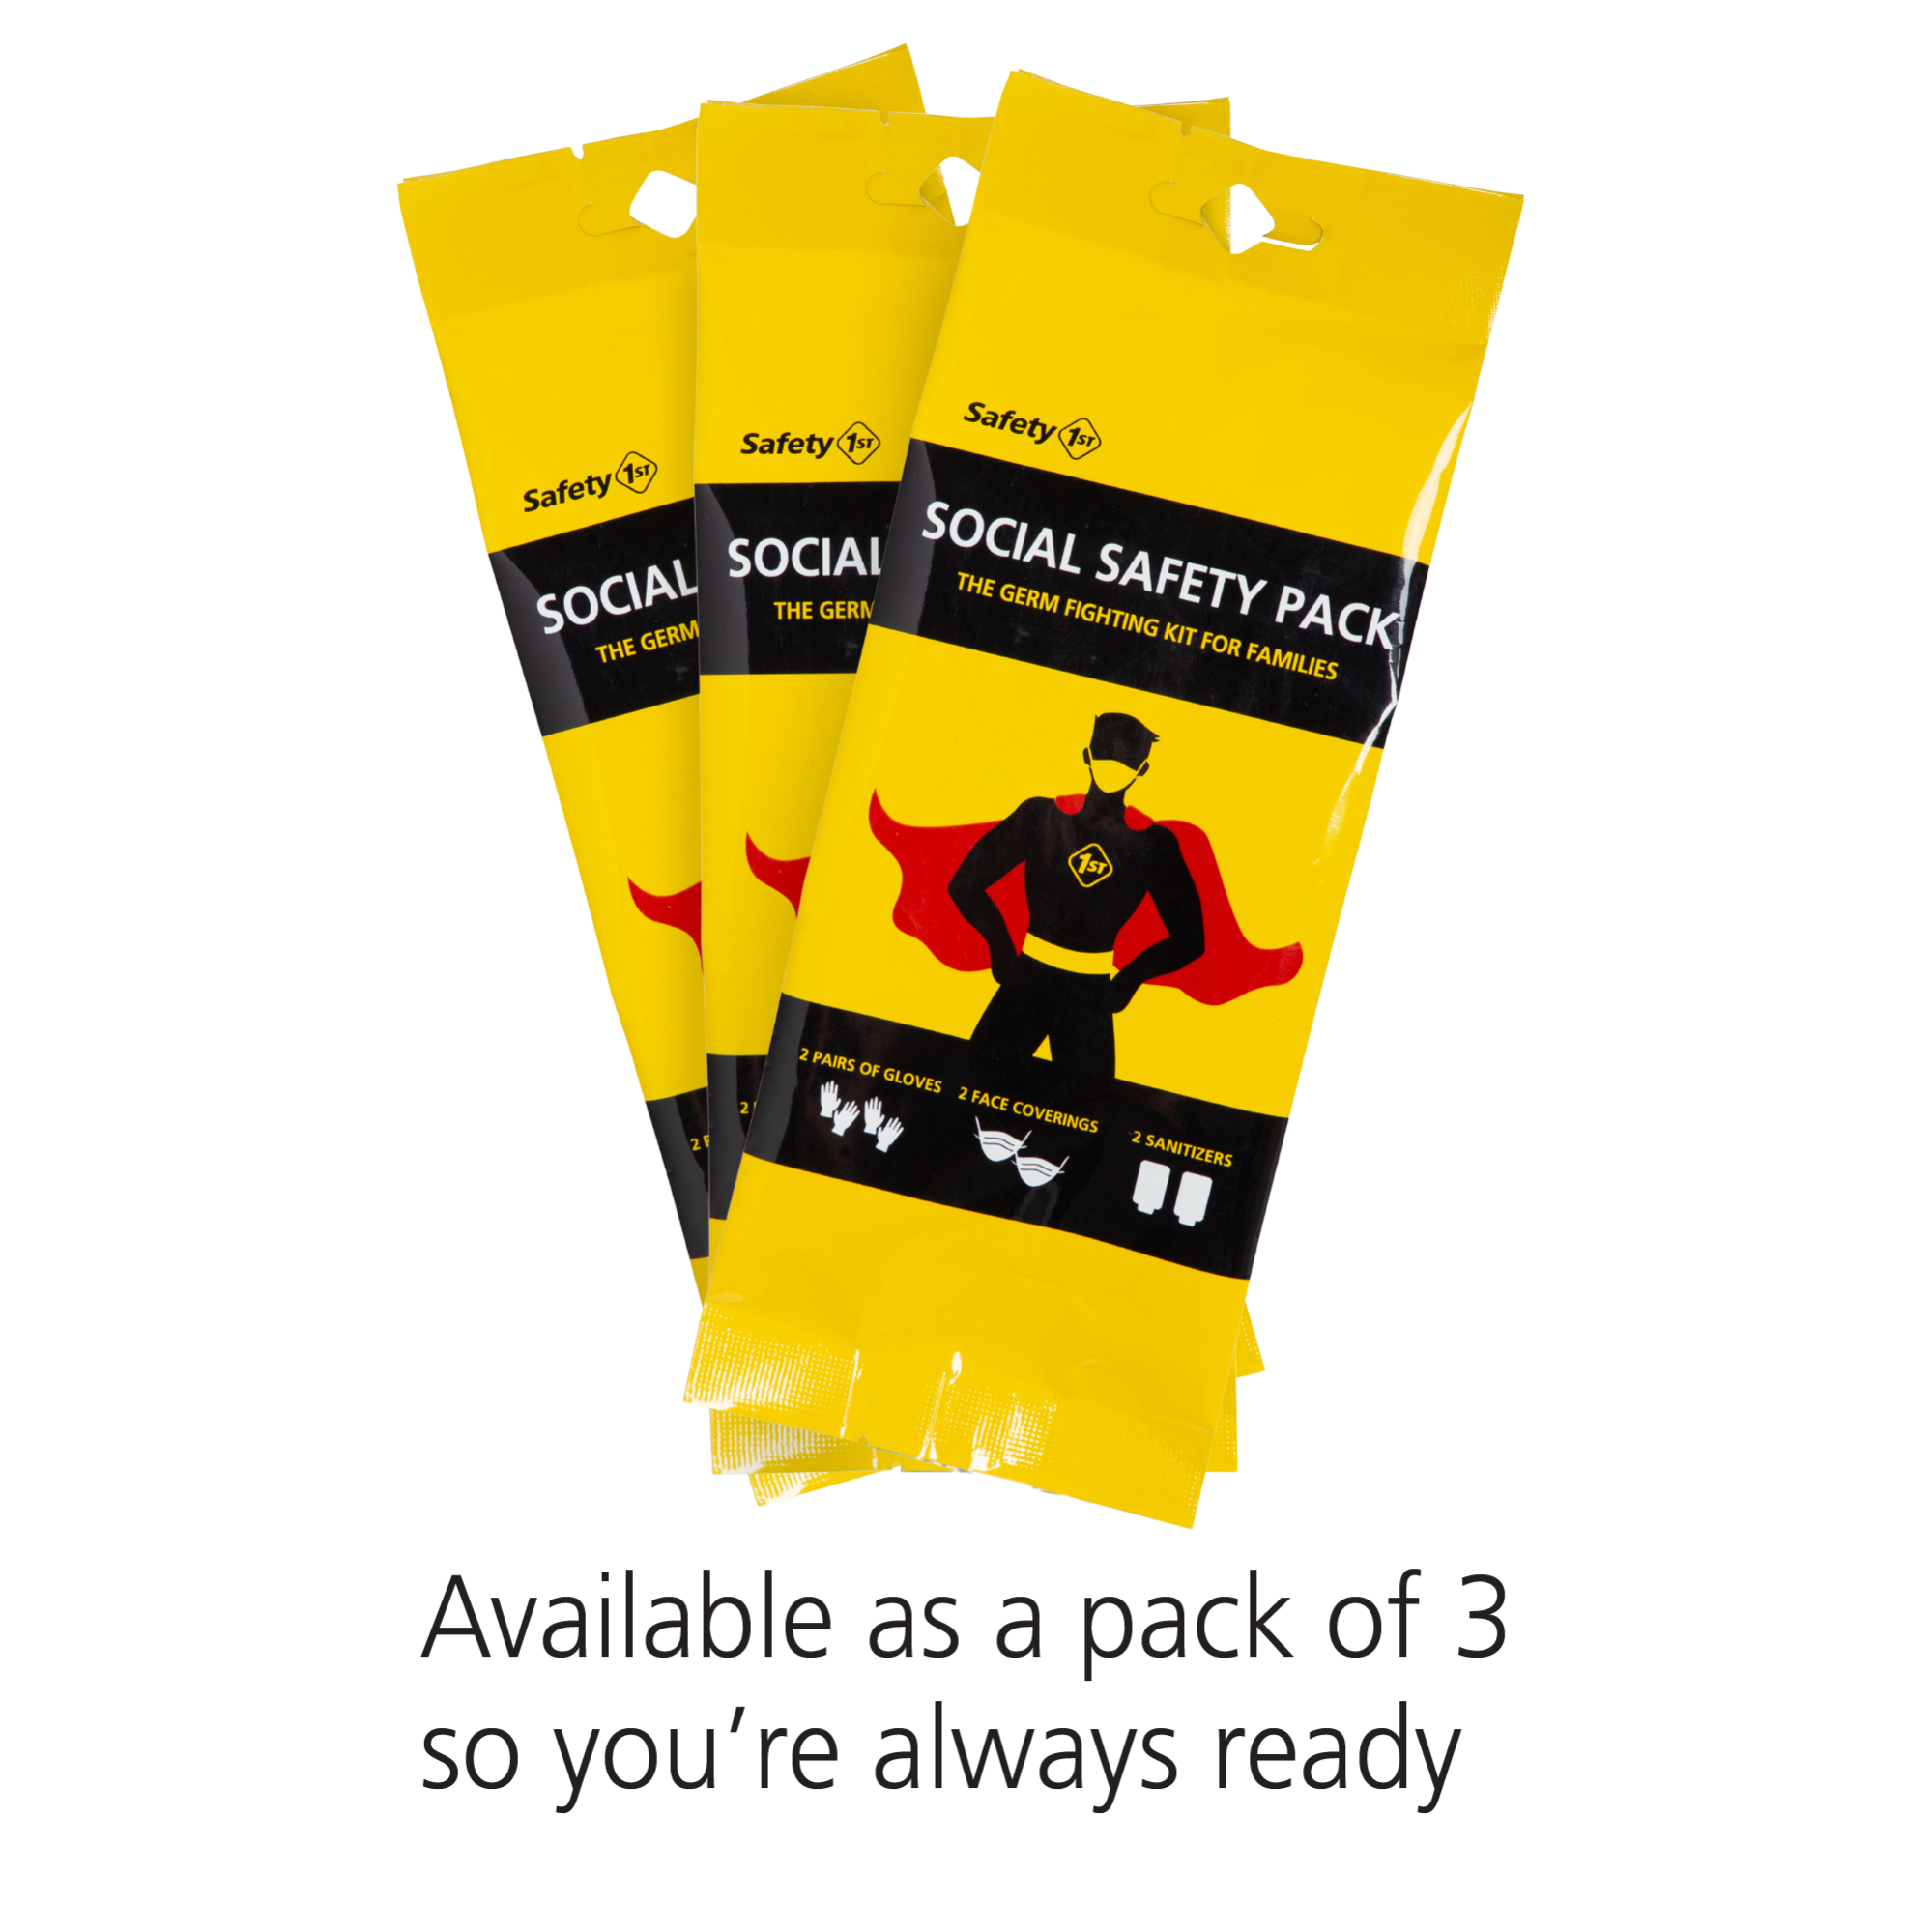 Available as a pack of 3 so you're always ready